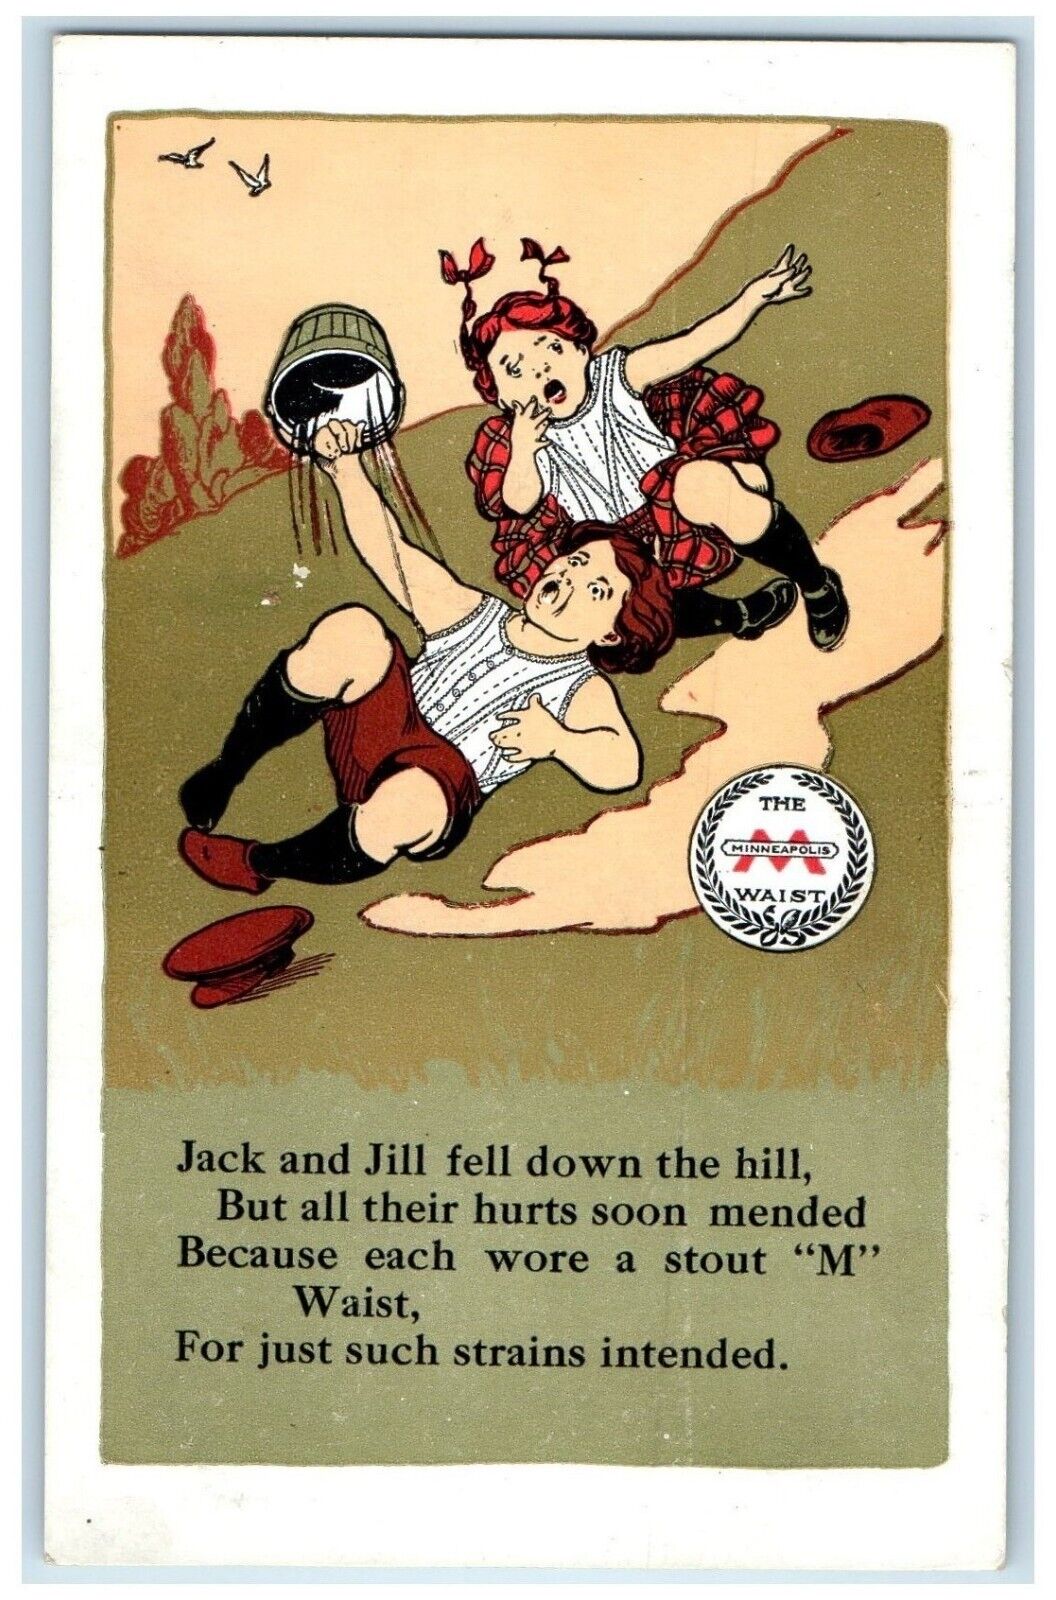 Jack And Jill Down Fairy Tale Advertising Minneapolis Knitting Works Postcard